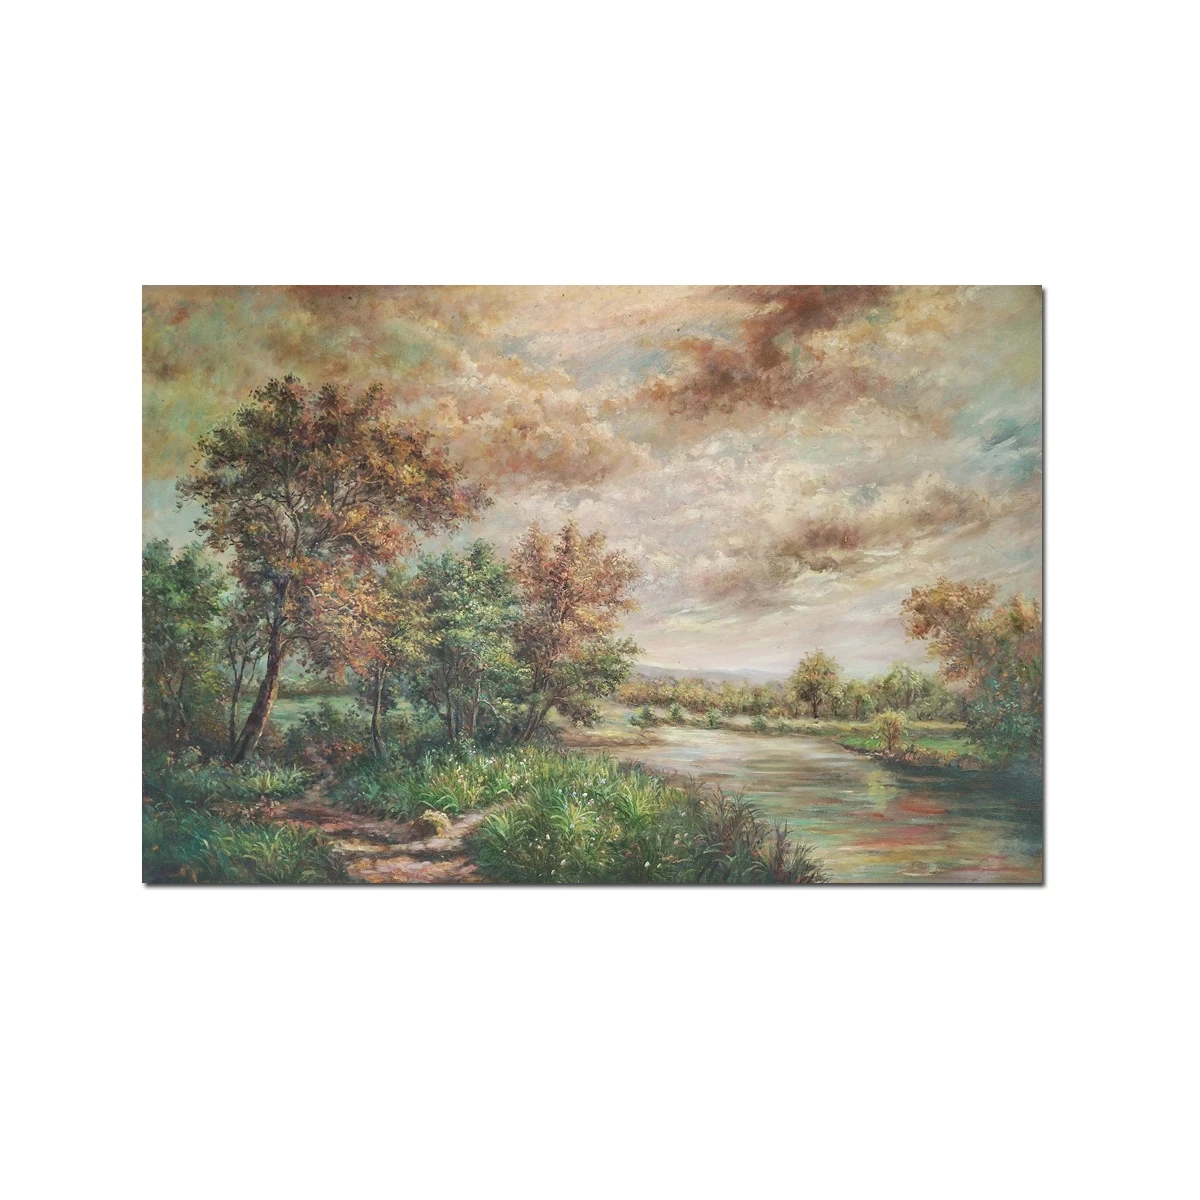 

High Quality Hand painted Classical IMPRESSIONISM Landscape Oil painting Reproduction on Canvas Wall Art Home Decor